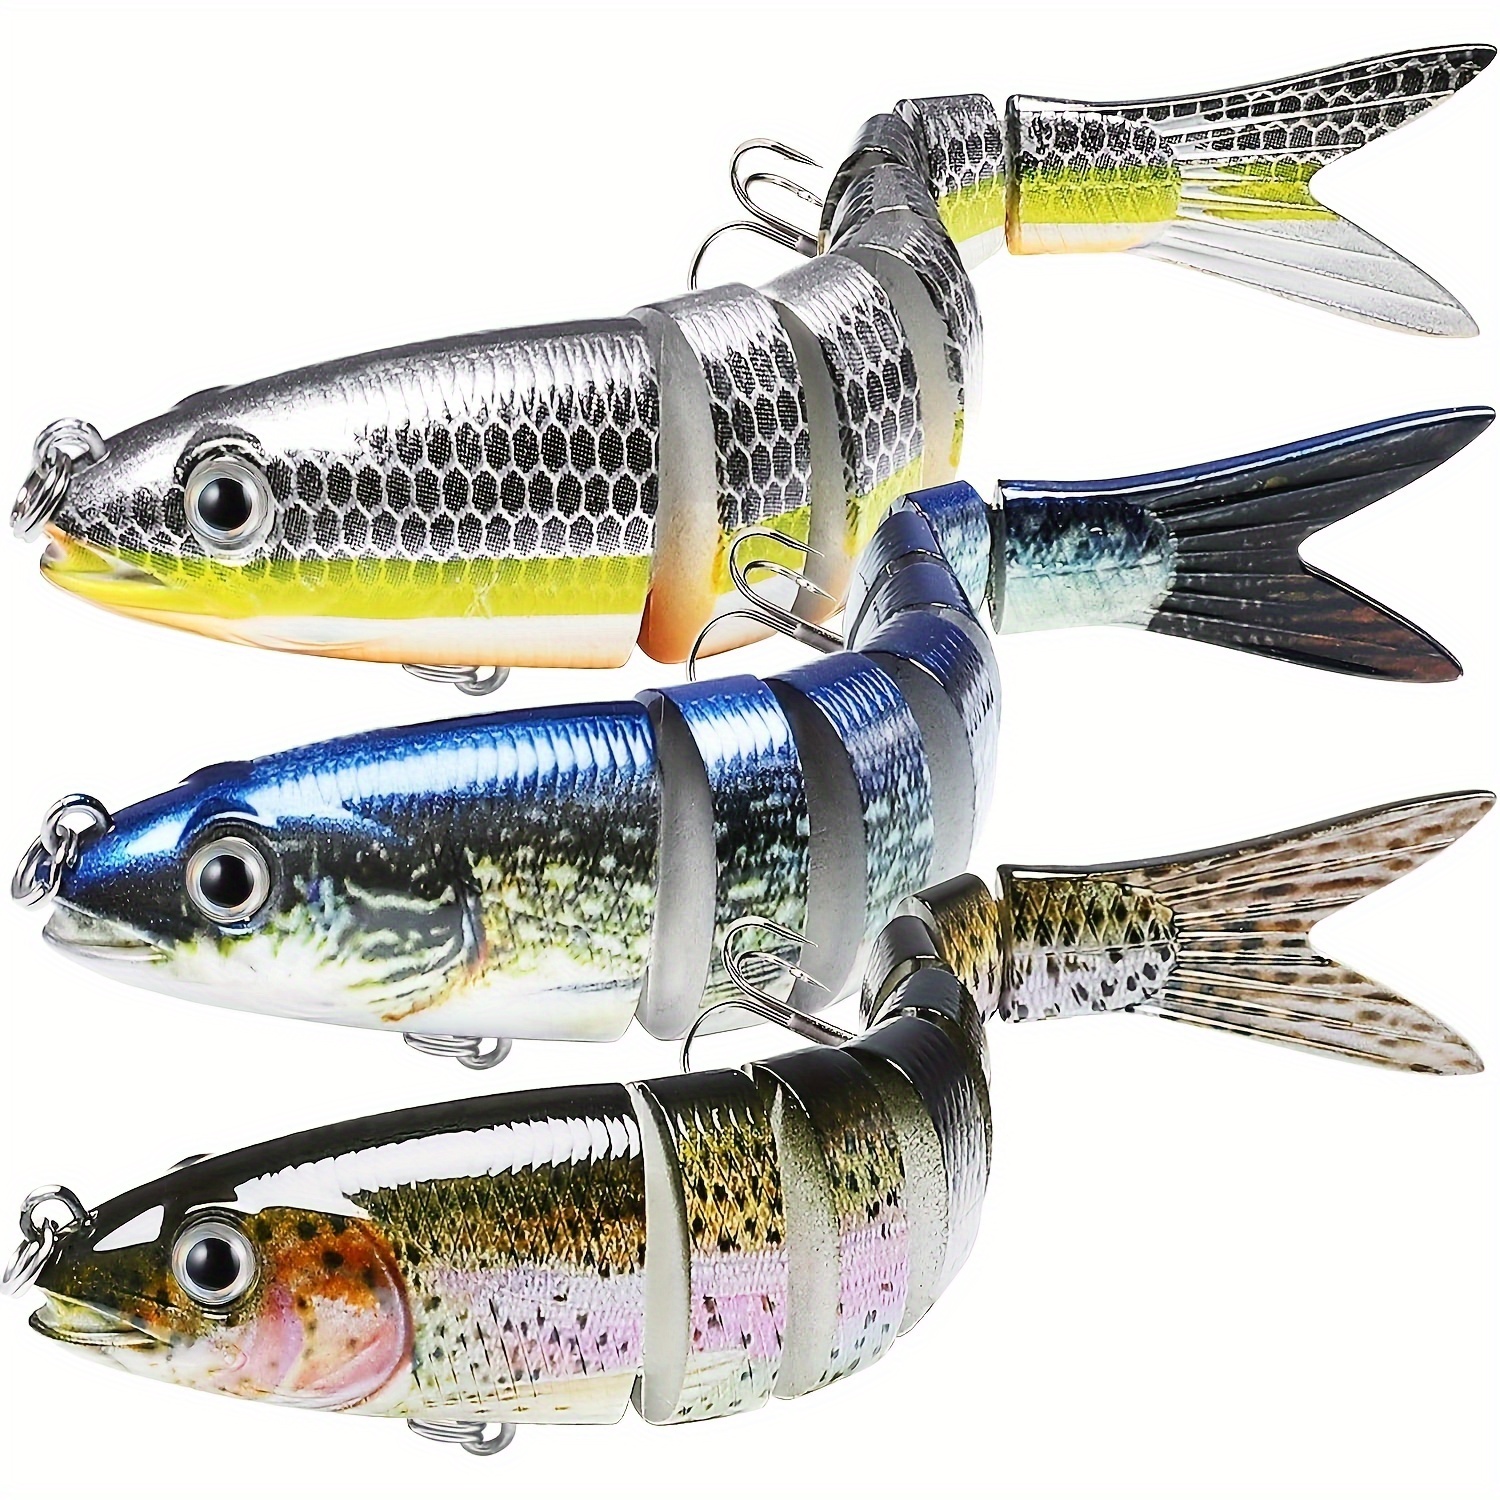 

1pc Ultra-realistic Realistic Fishing Lure - Swimming Action With Multisection Design - 19g/135mm - Master Crafted For Fish Catches